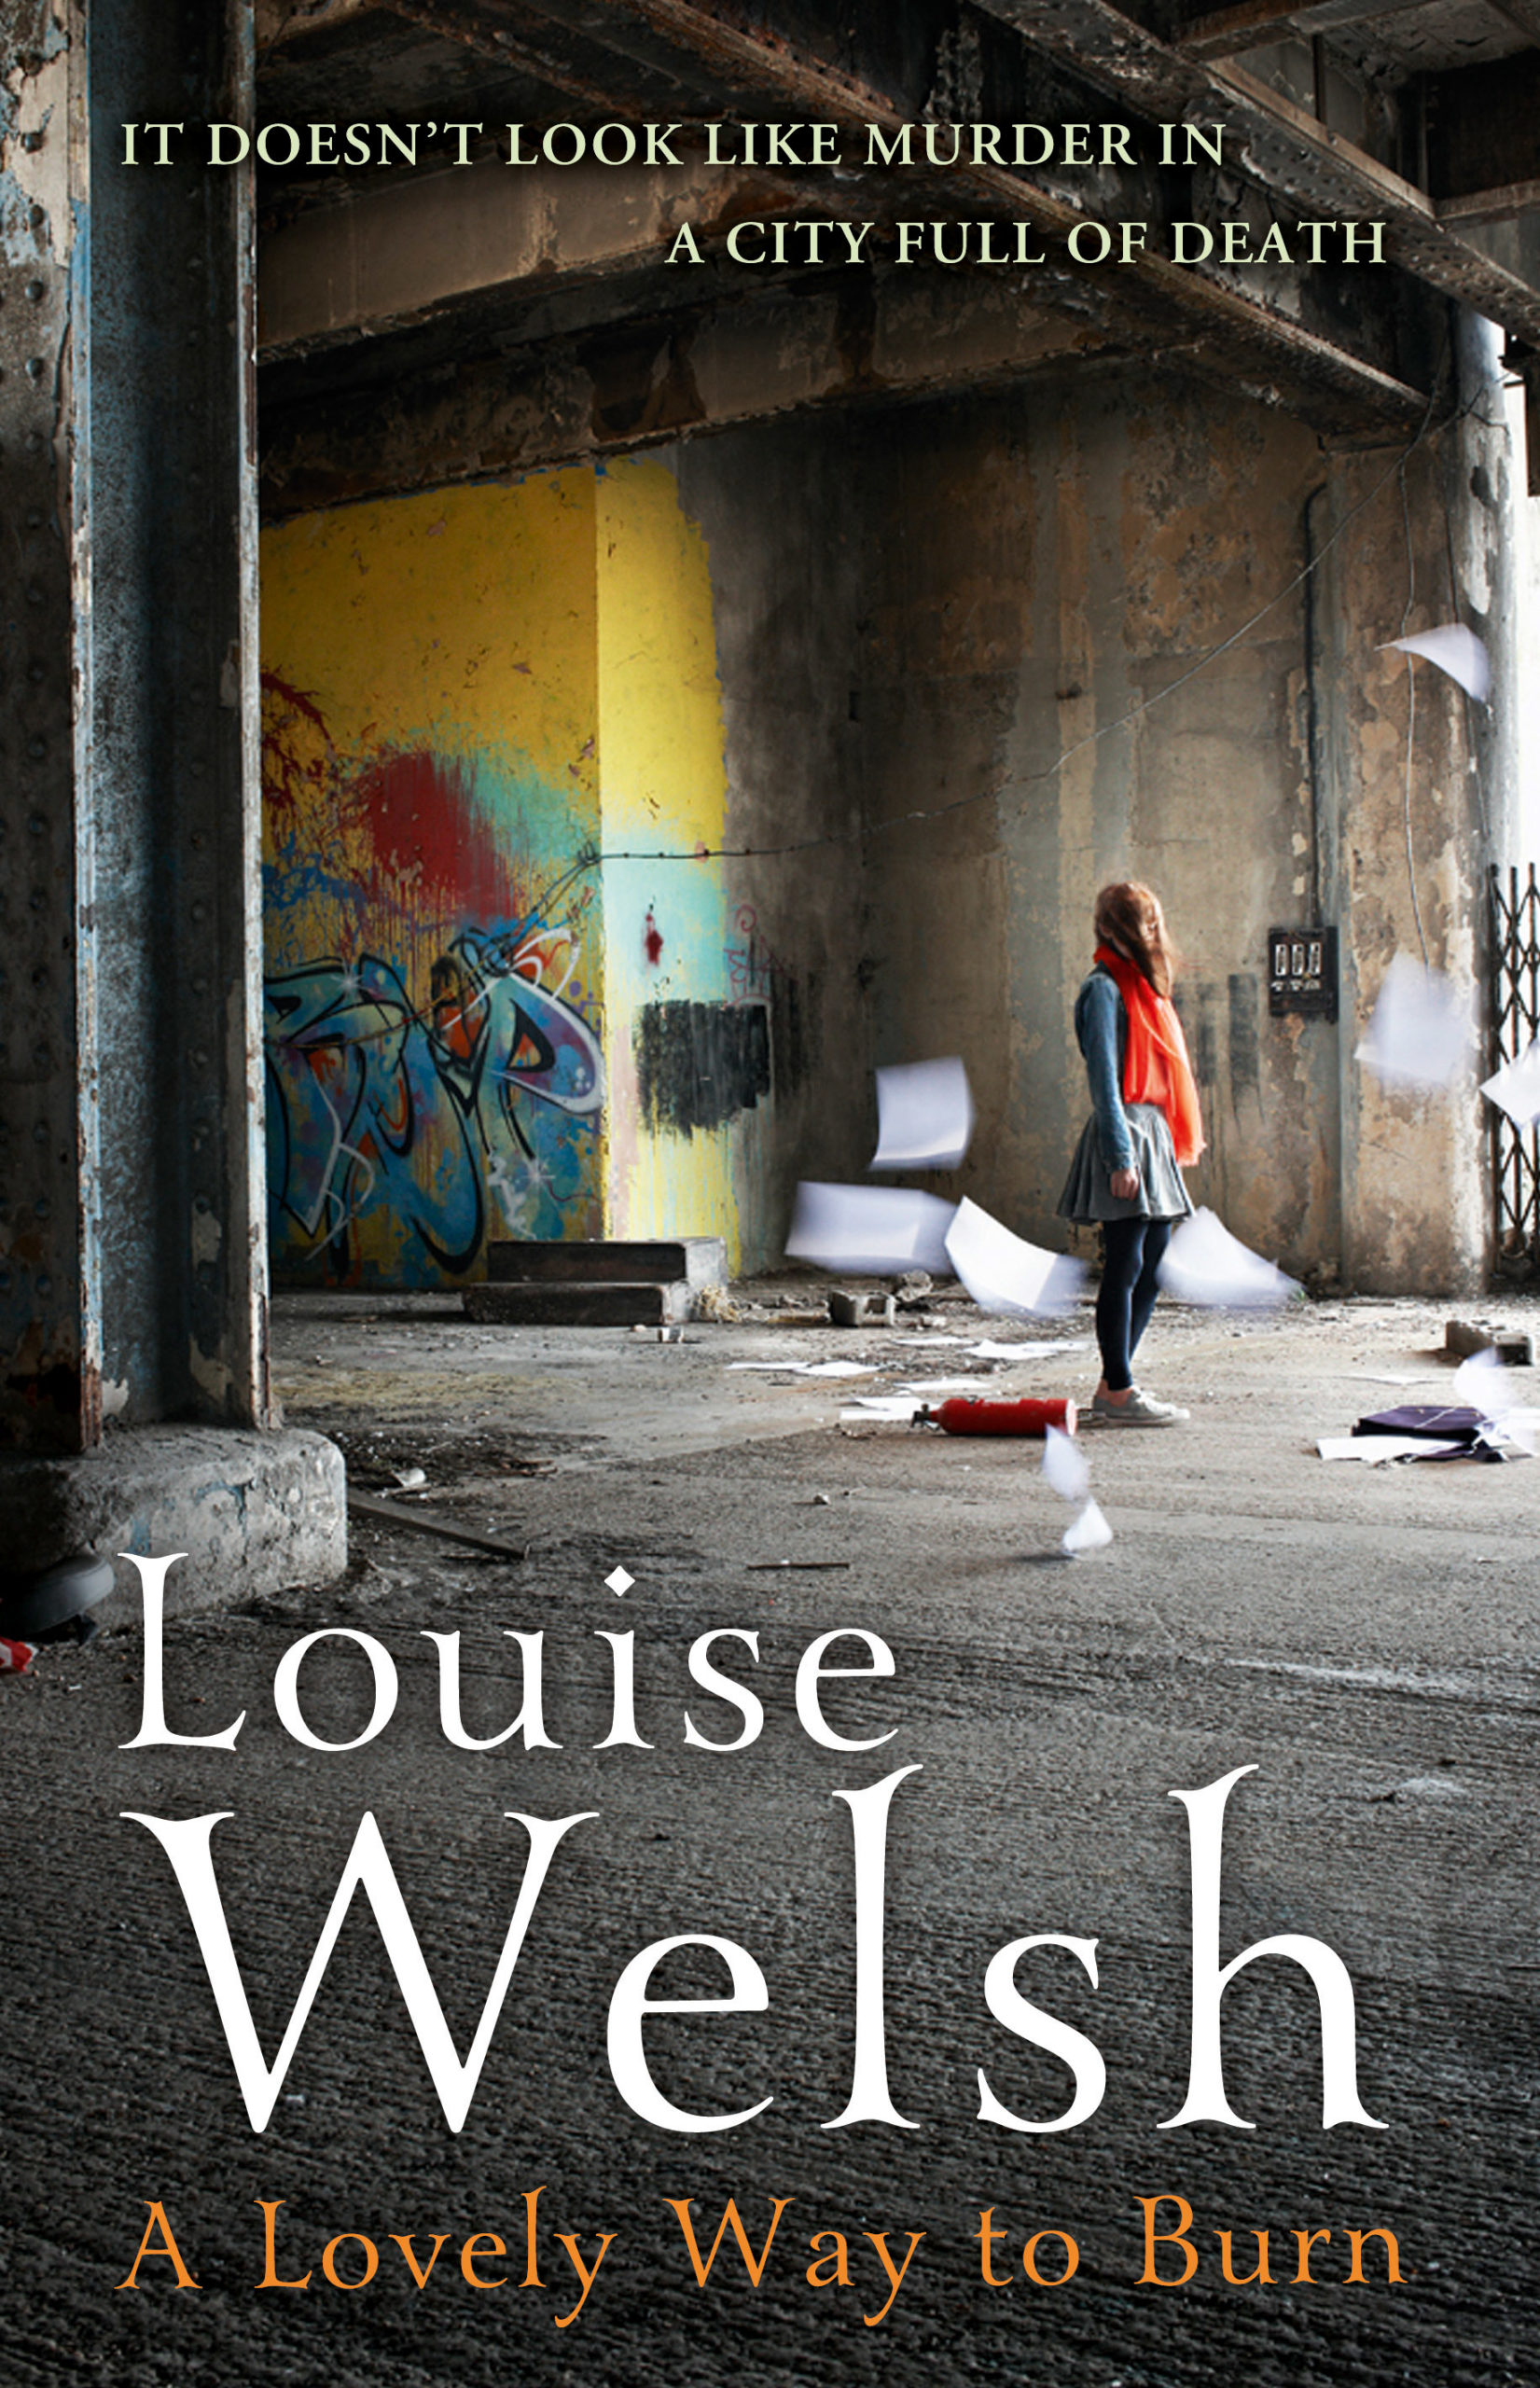 Author Q&A with Louise Welsh